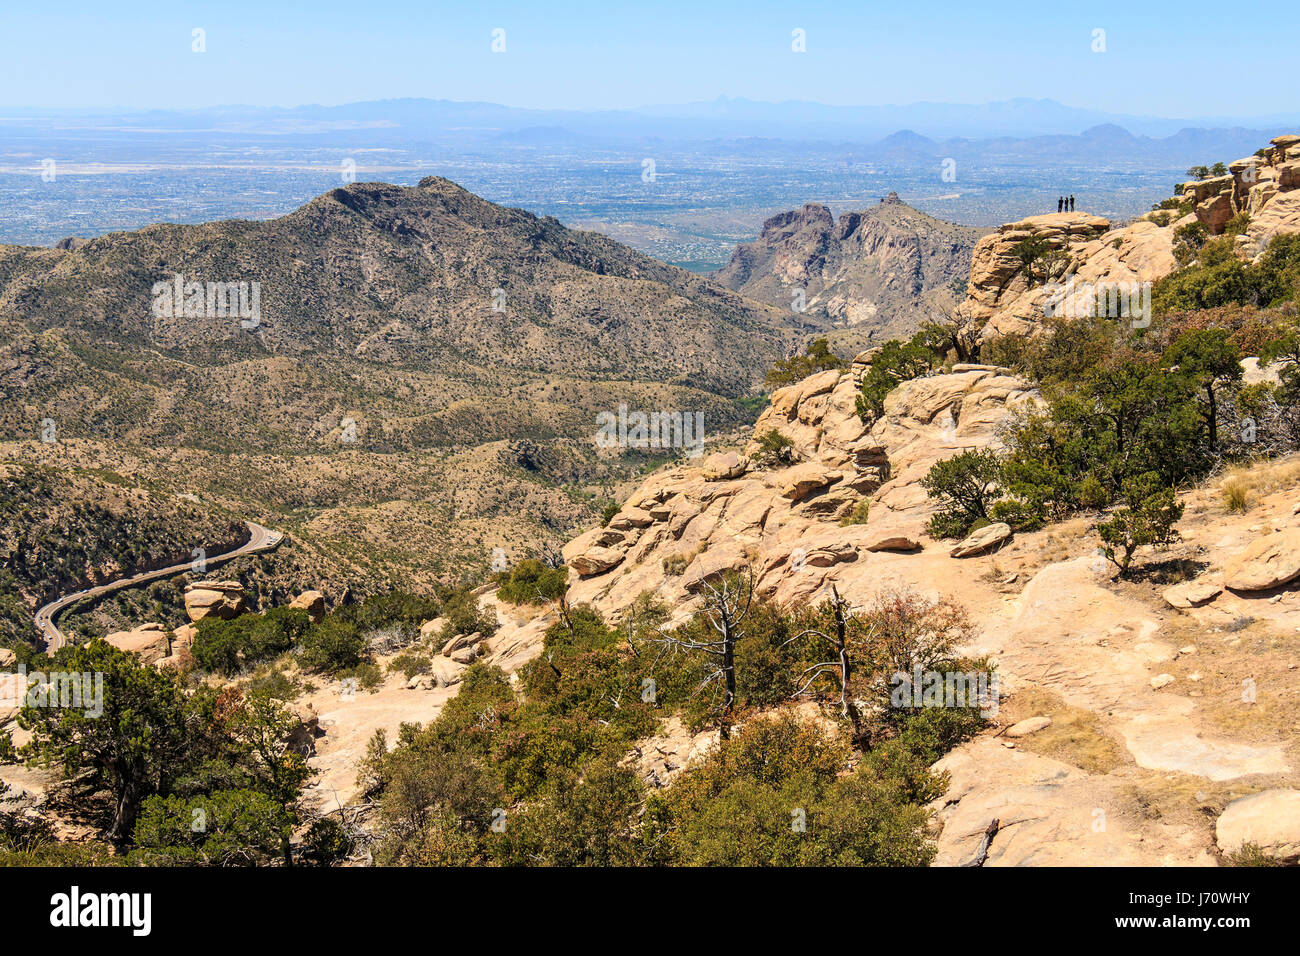 Three people admire the view from a rock at Windy Point, along the road up Mount Lemmon. With a summit elevation of 9,159 feet (2,792 m), it is the hi Stock Photo